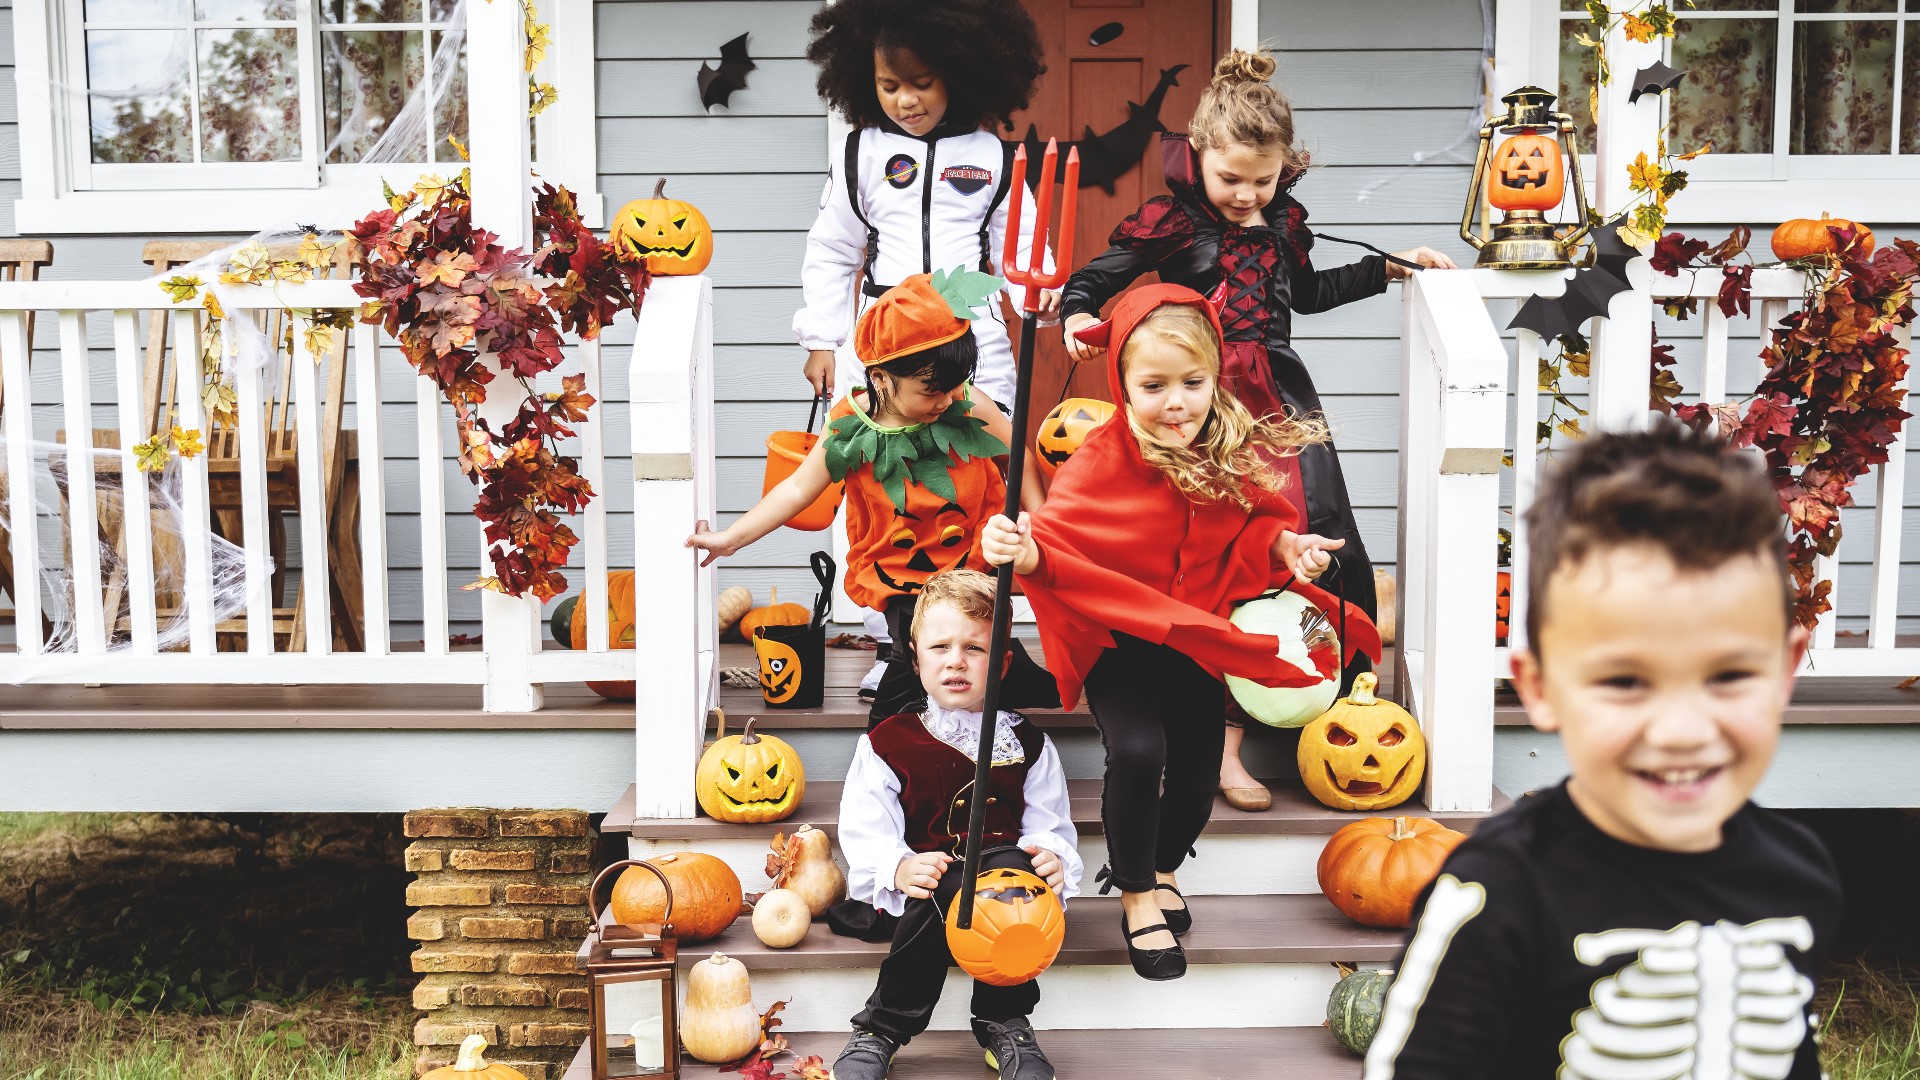 Trickortreat dates and times in central Ohio